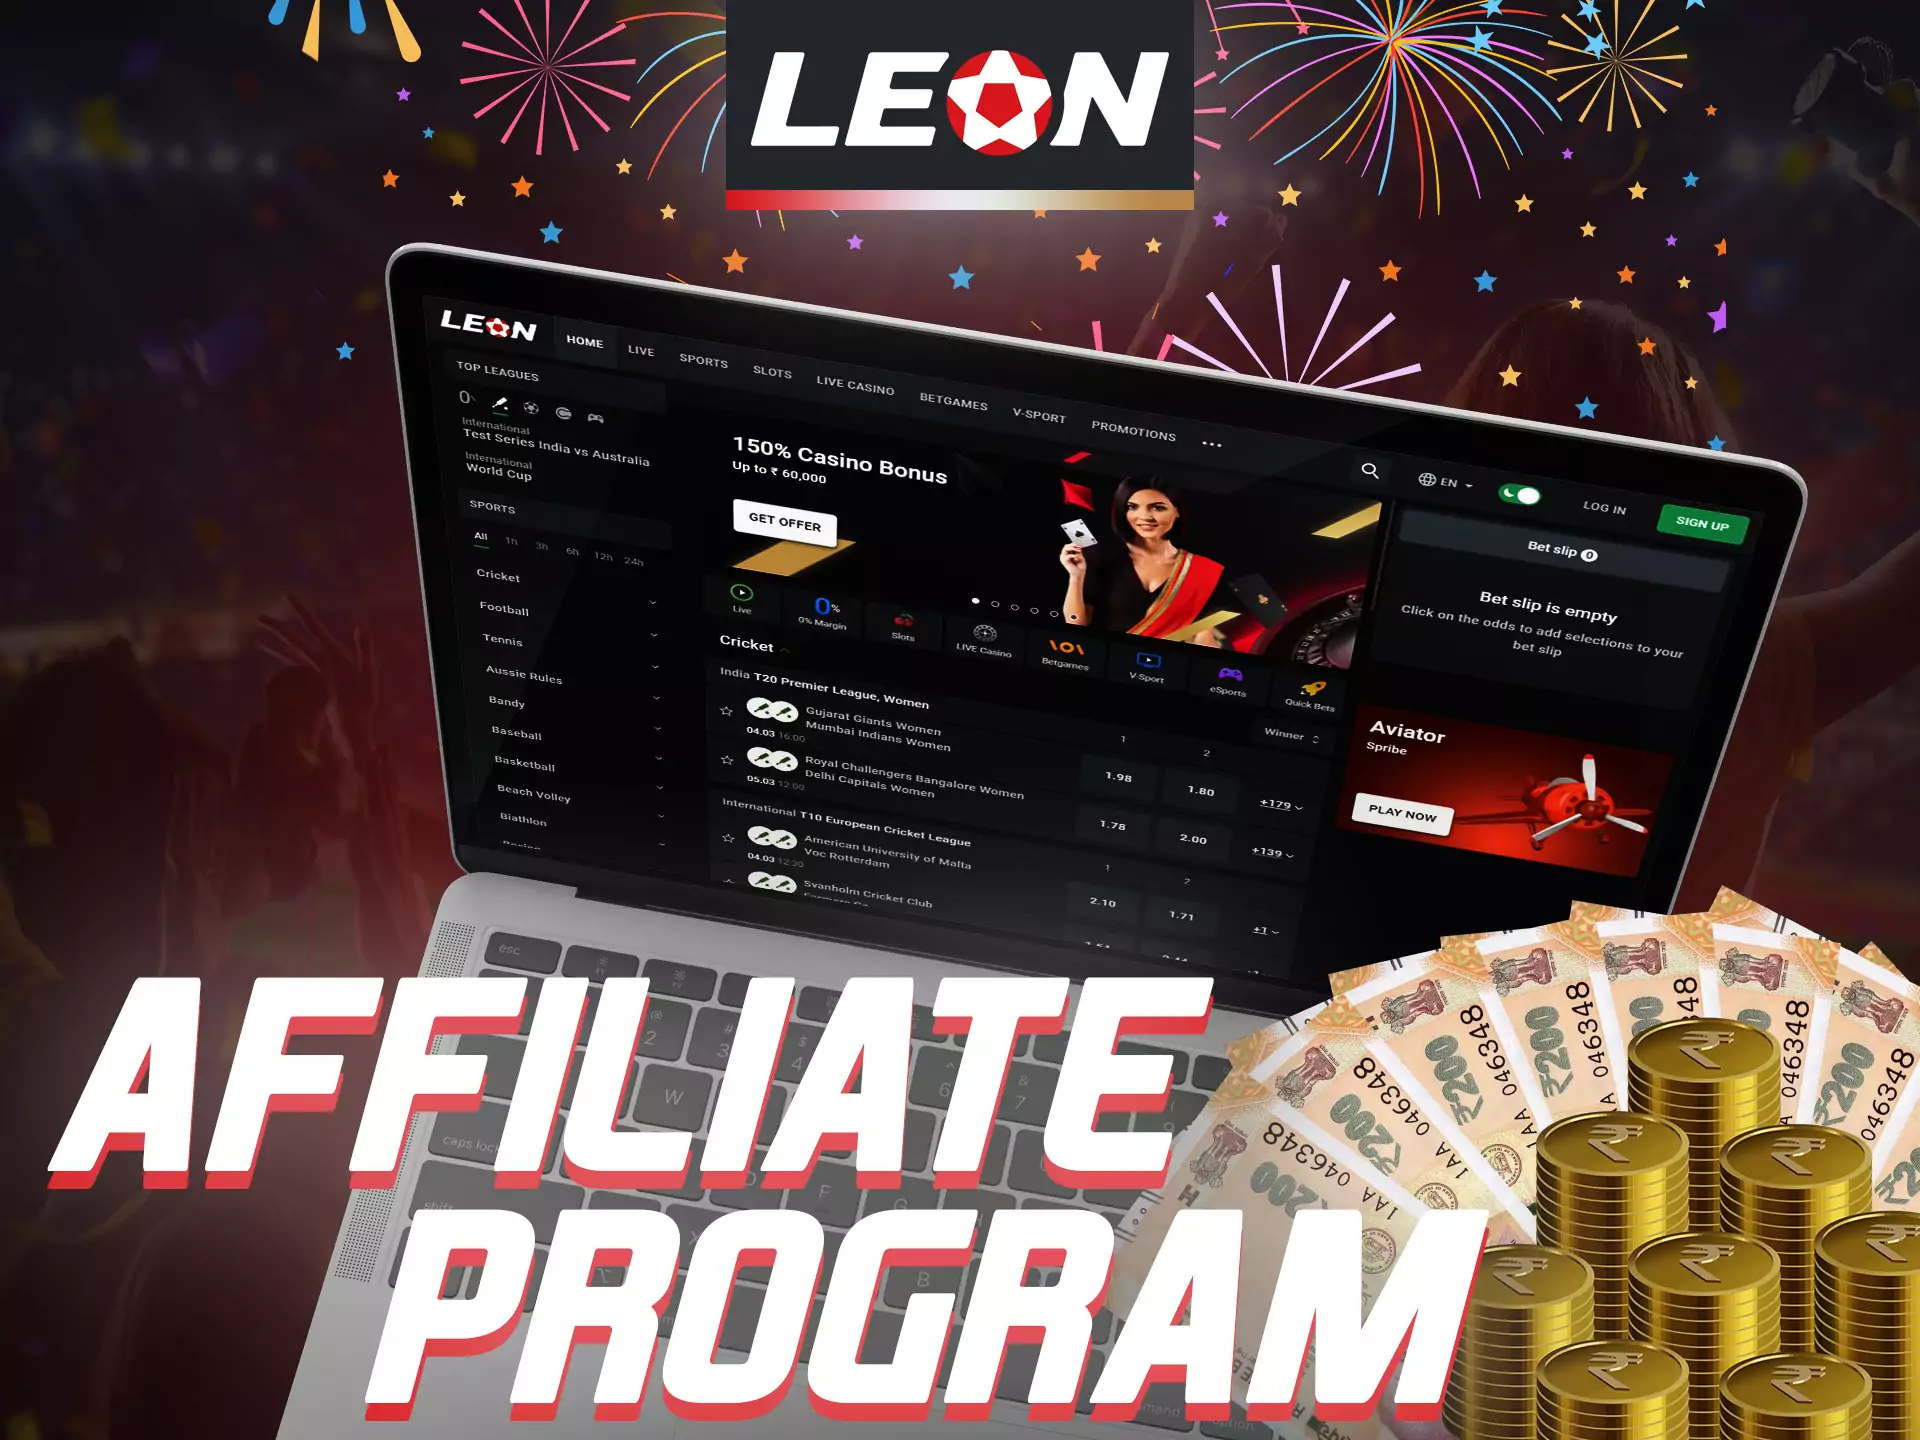 You can join a very profitable affiliate program at Leonbet.